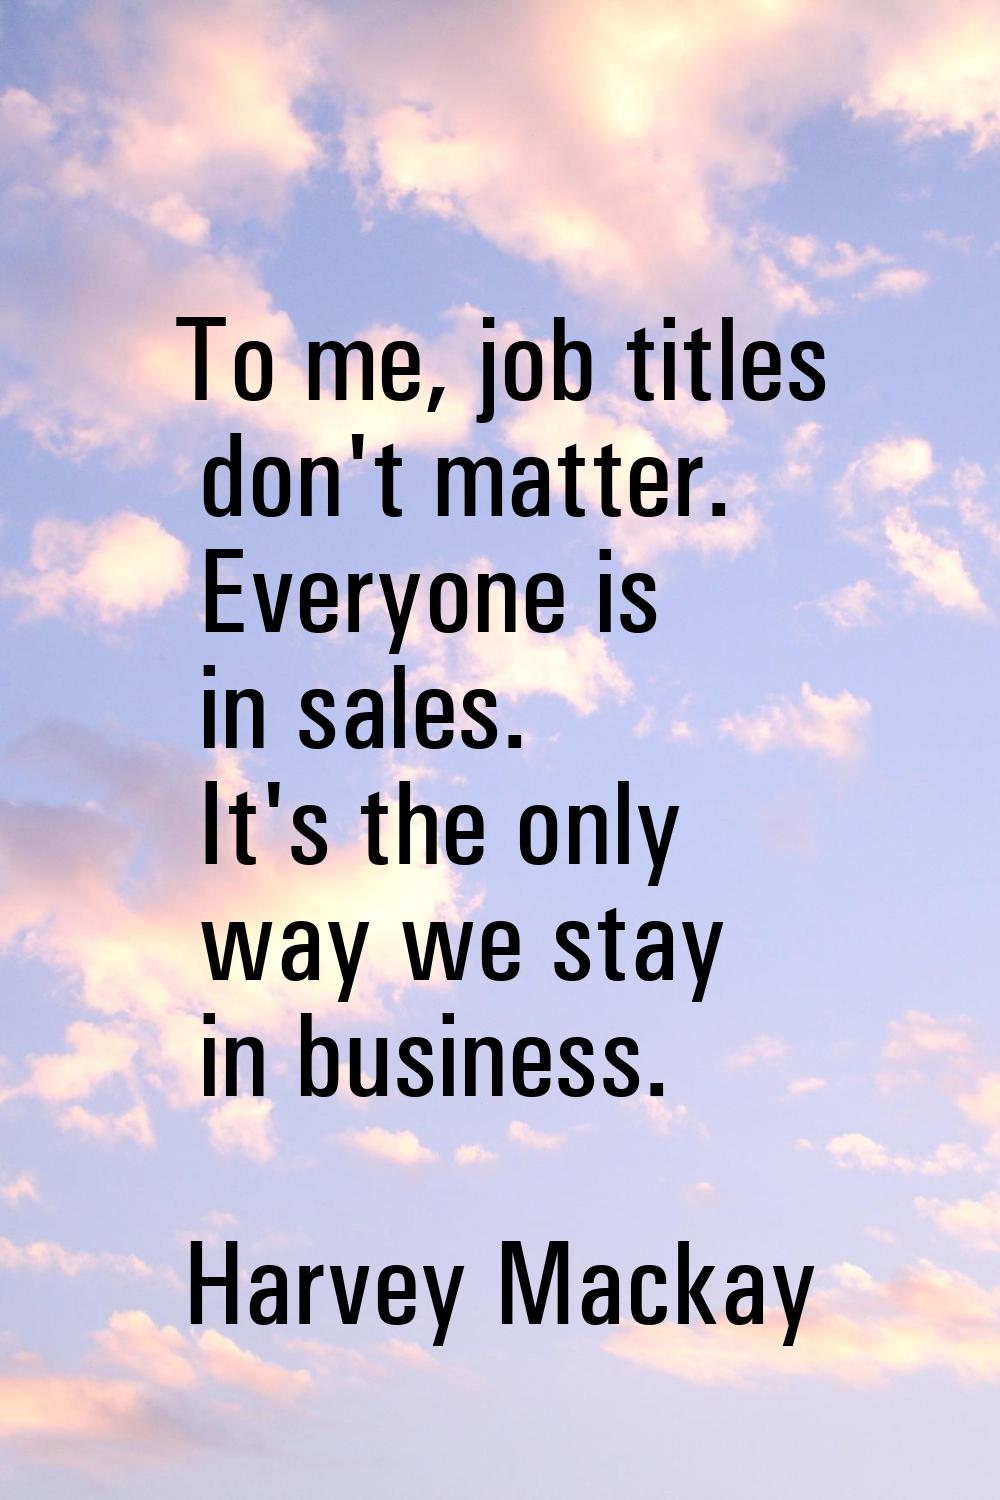 To me, job titles don't matter. Everyone is in sales. It's the only way we stay in business.